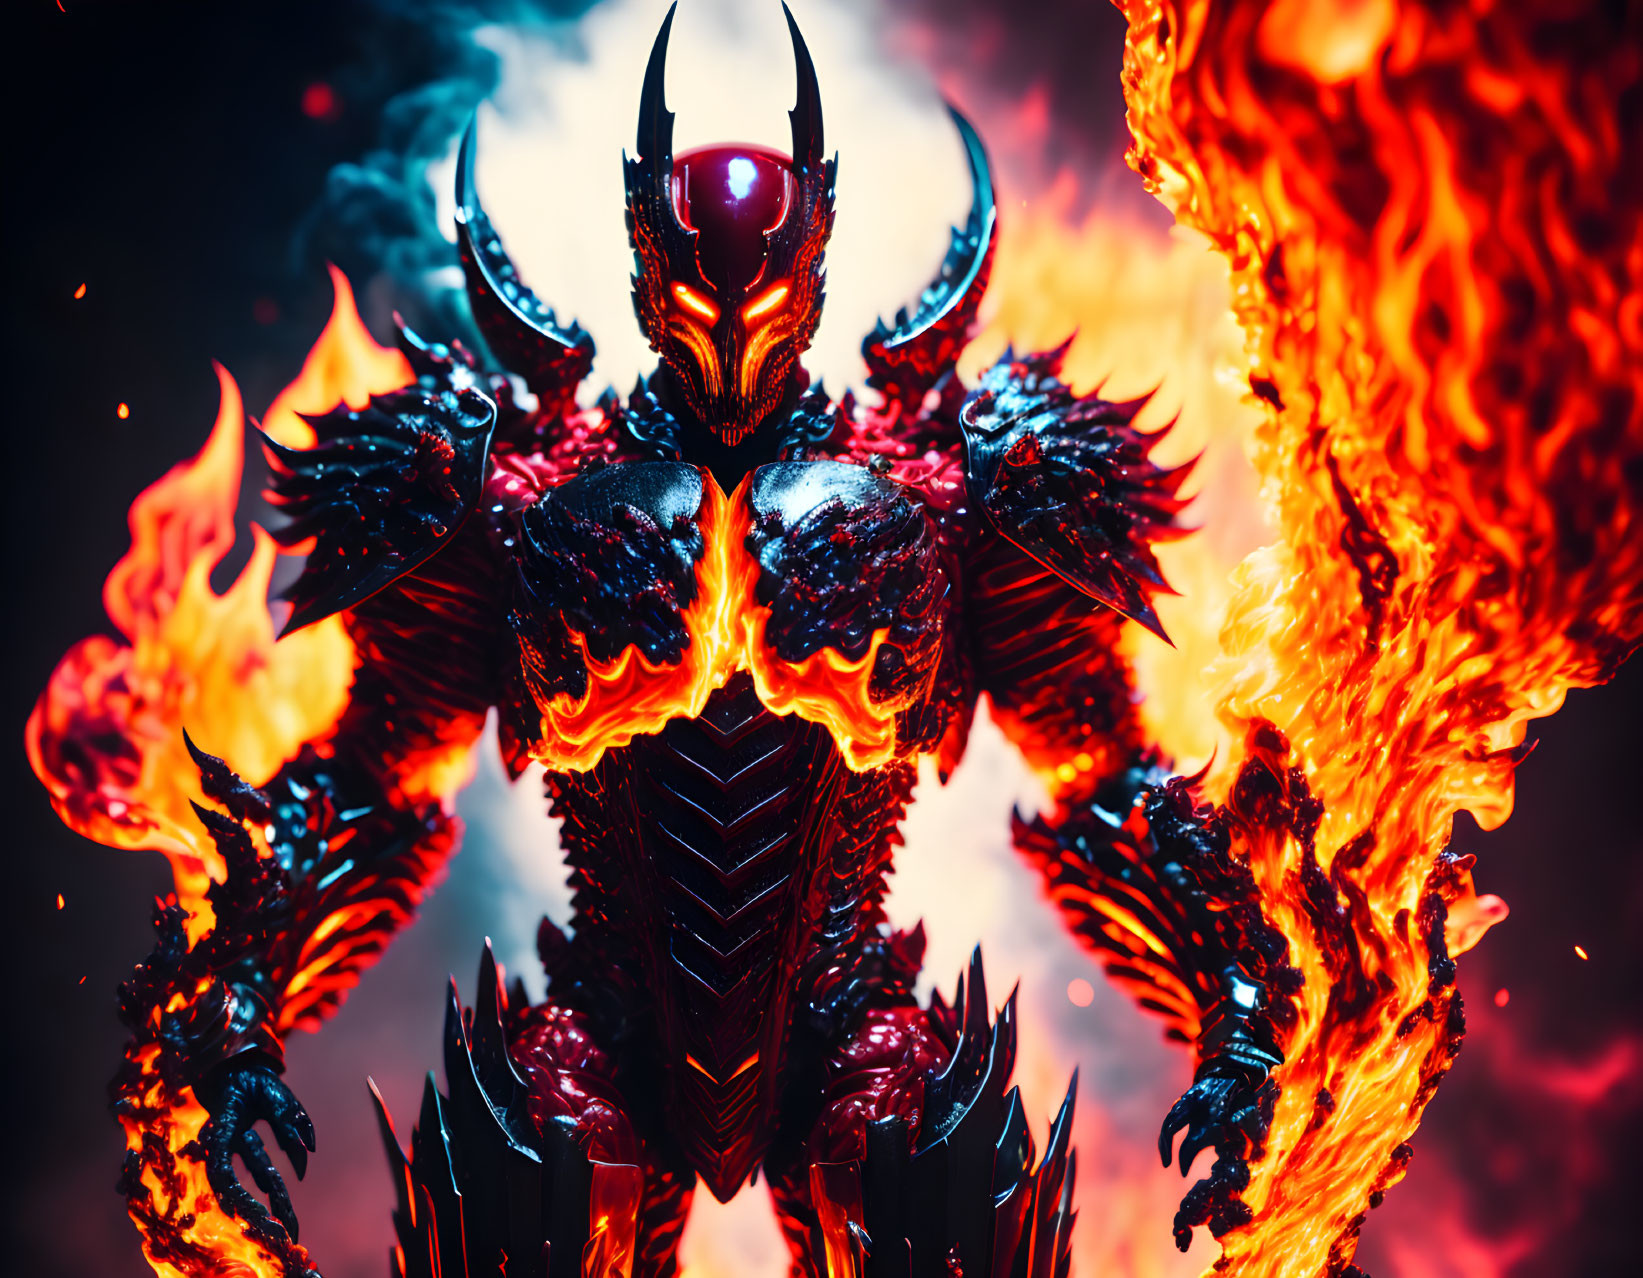 Hellspawn, Army of the flames